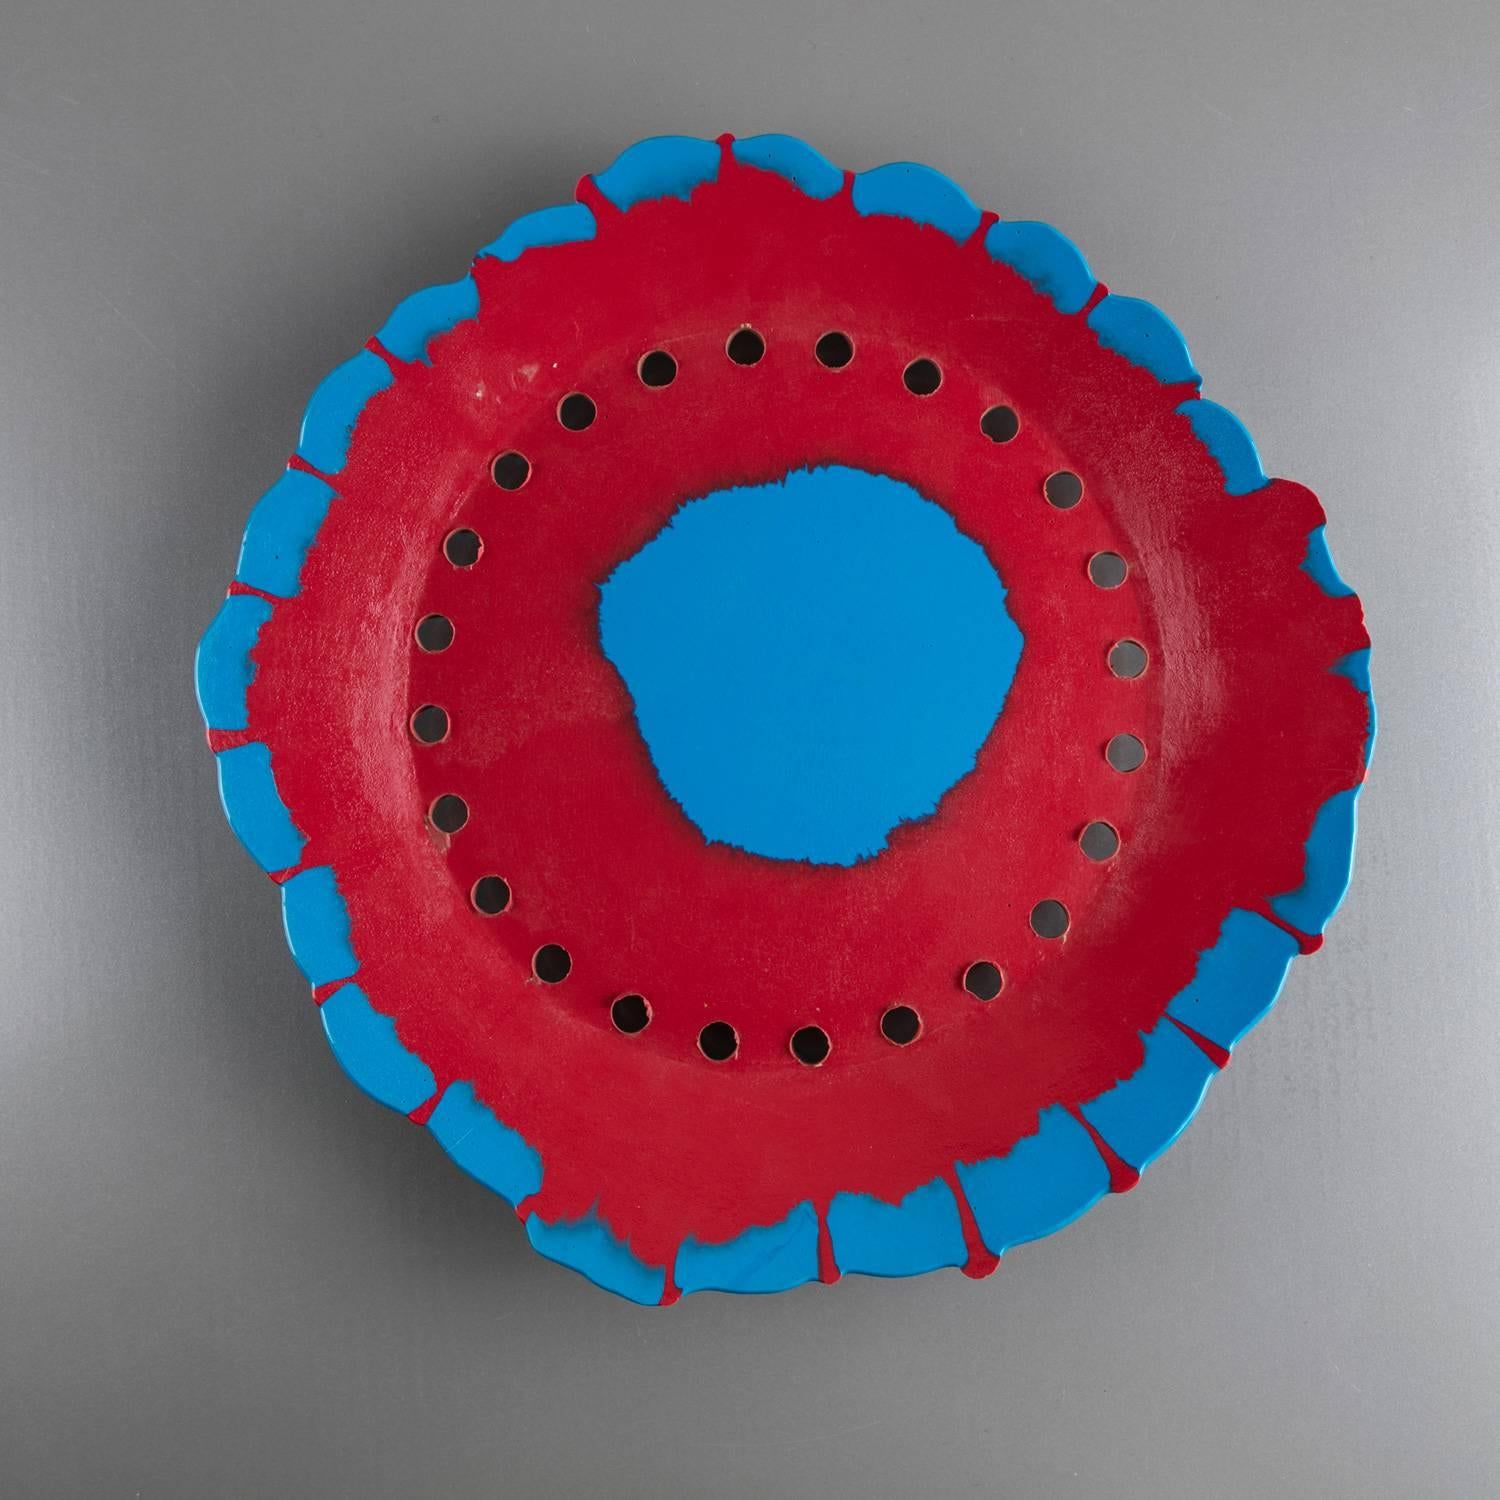 Early 1990s centerpiece by Gaetano Pesce.
This prototype fully represents the research of Pesce with plastic materials, later developed with other manufacturers.
The piece was manufactured by Gaetano Pesce in the US and shipped to Italy as a